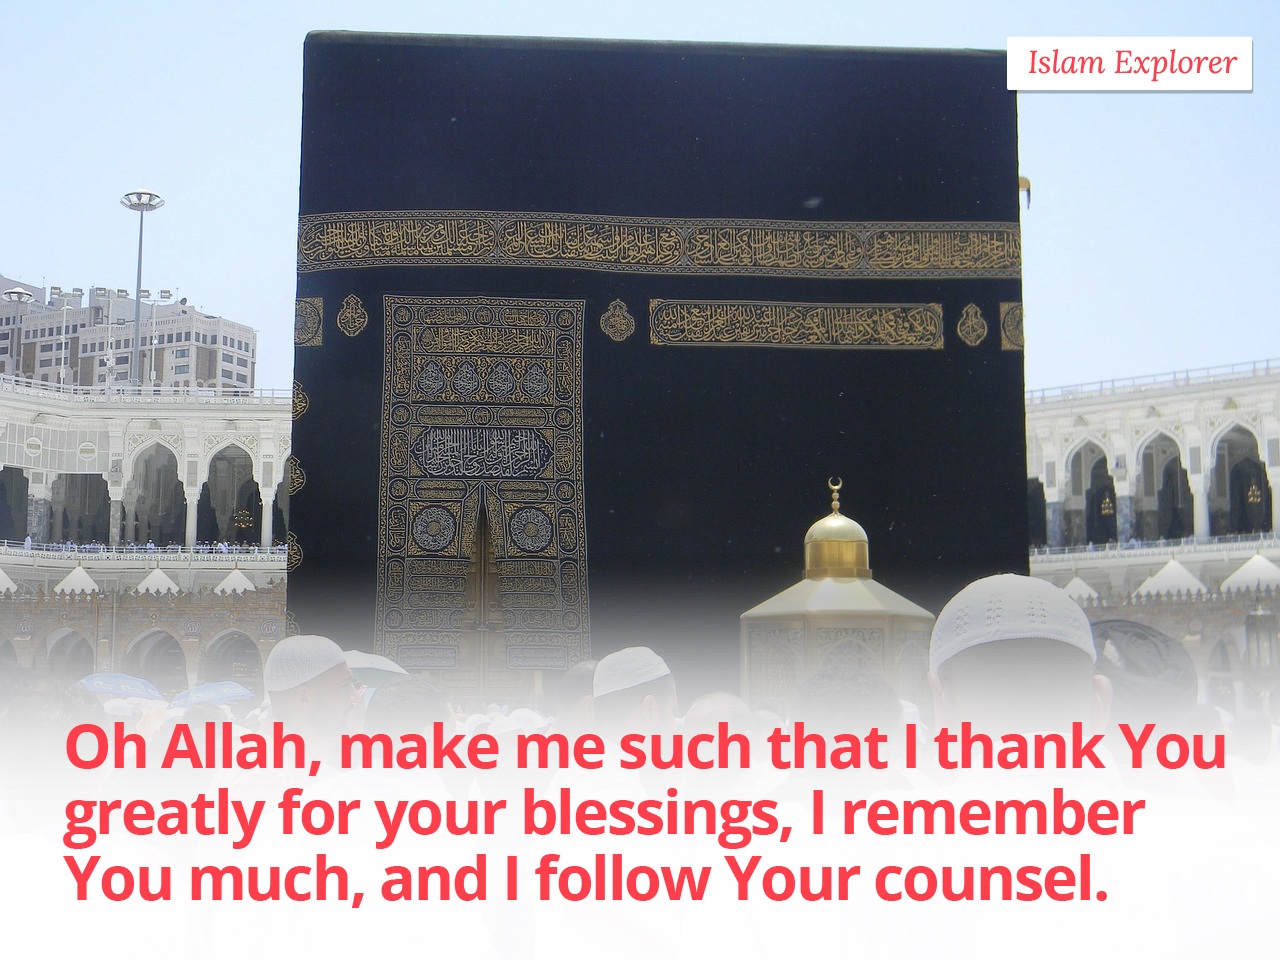 Oh Allah, make me such that I thank You greatly for your blessings